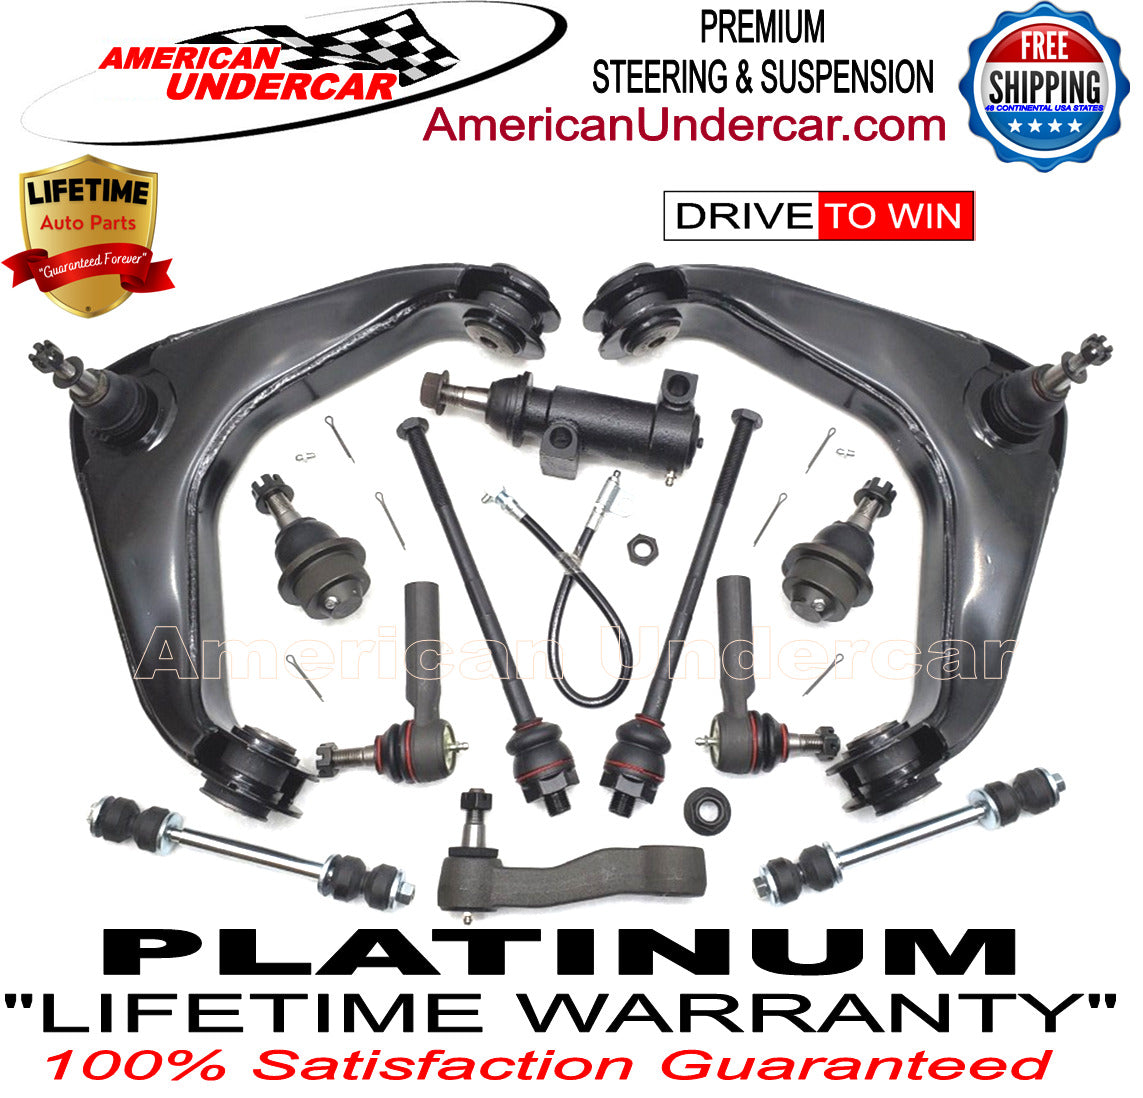 Lifetime Steering and Suspension Kit for 2001-2010 Chevrolet Silverado 3500HD 4x4